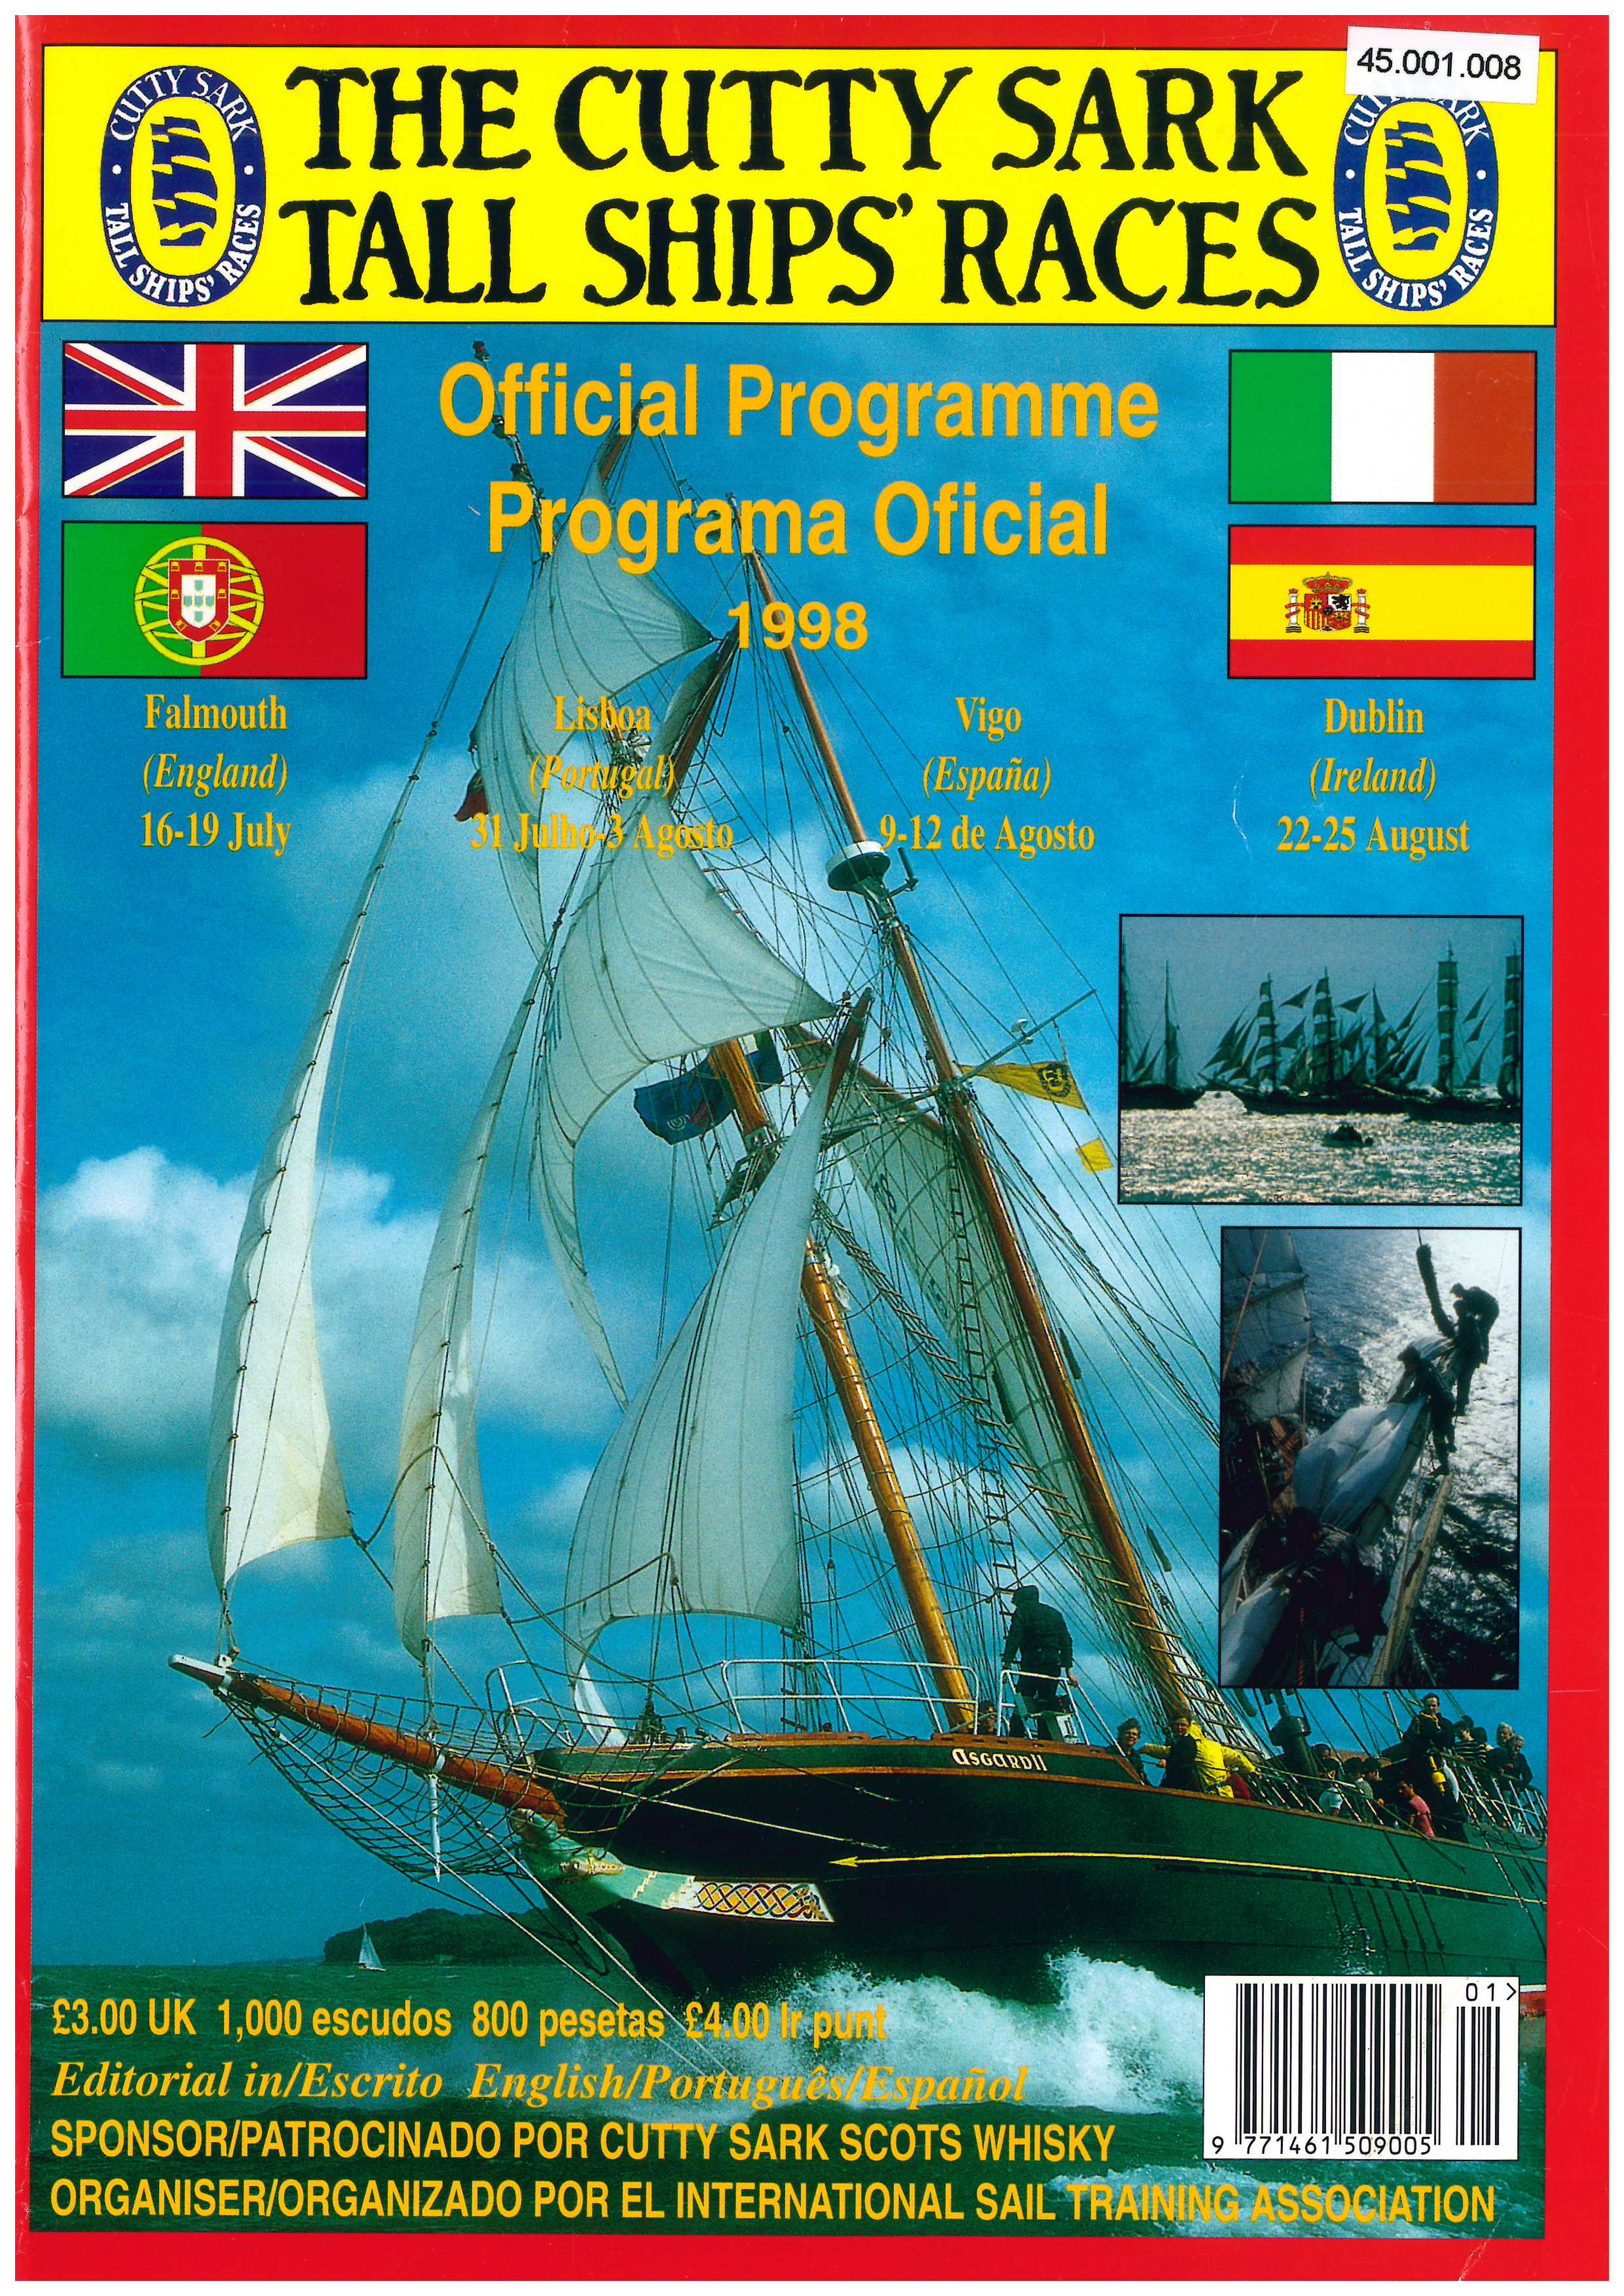 A scan of the official programme for the 1998 Cutty Sark Tall Ships race from Falmouth. The scan is of the front cover, which features a photo of a green sailing ship and two smaller photos taken of sailing ships on the ocean.